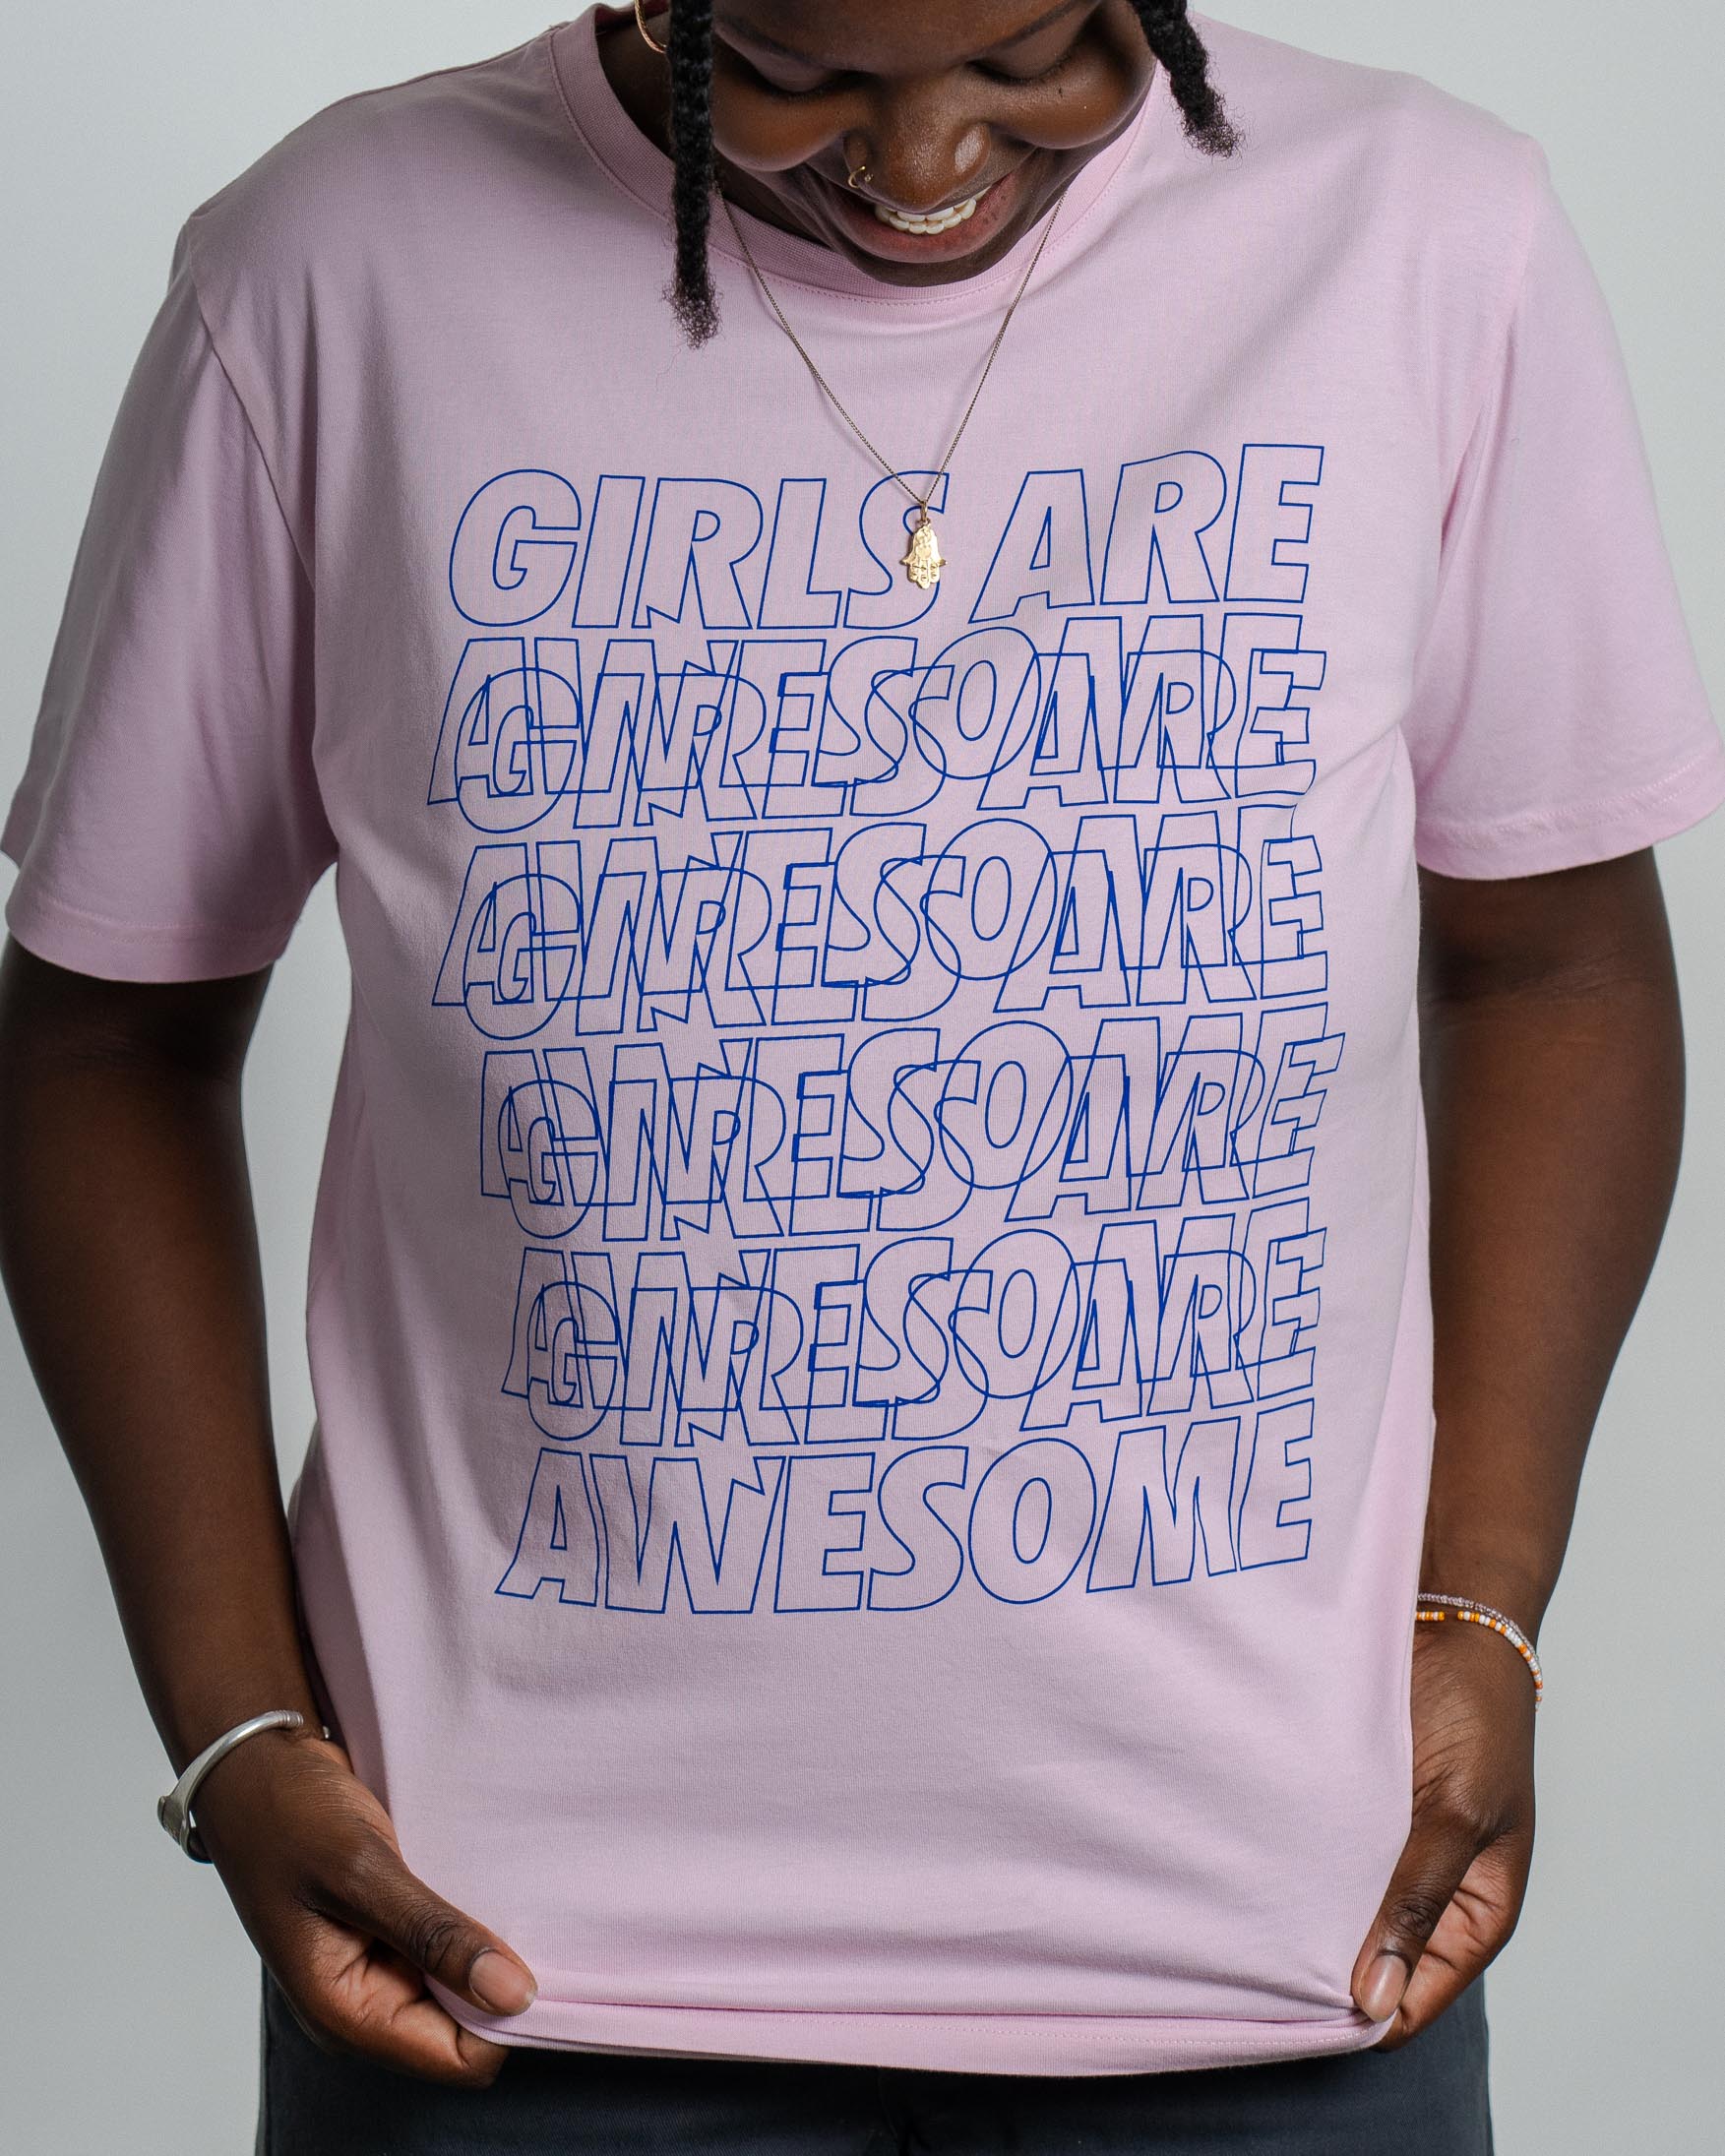 Girls are Awesome T-Shirt Messy Morning pink